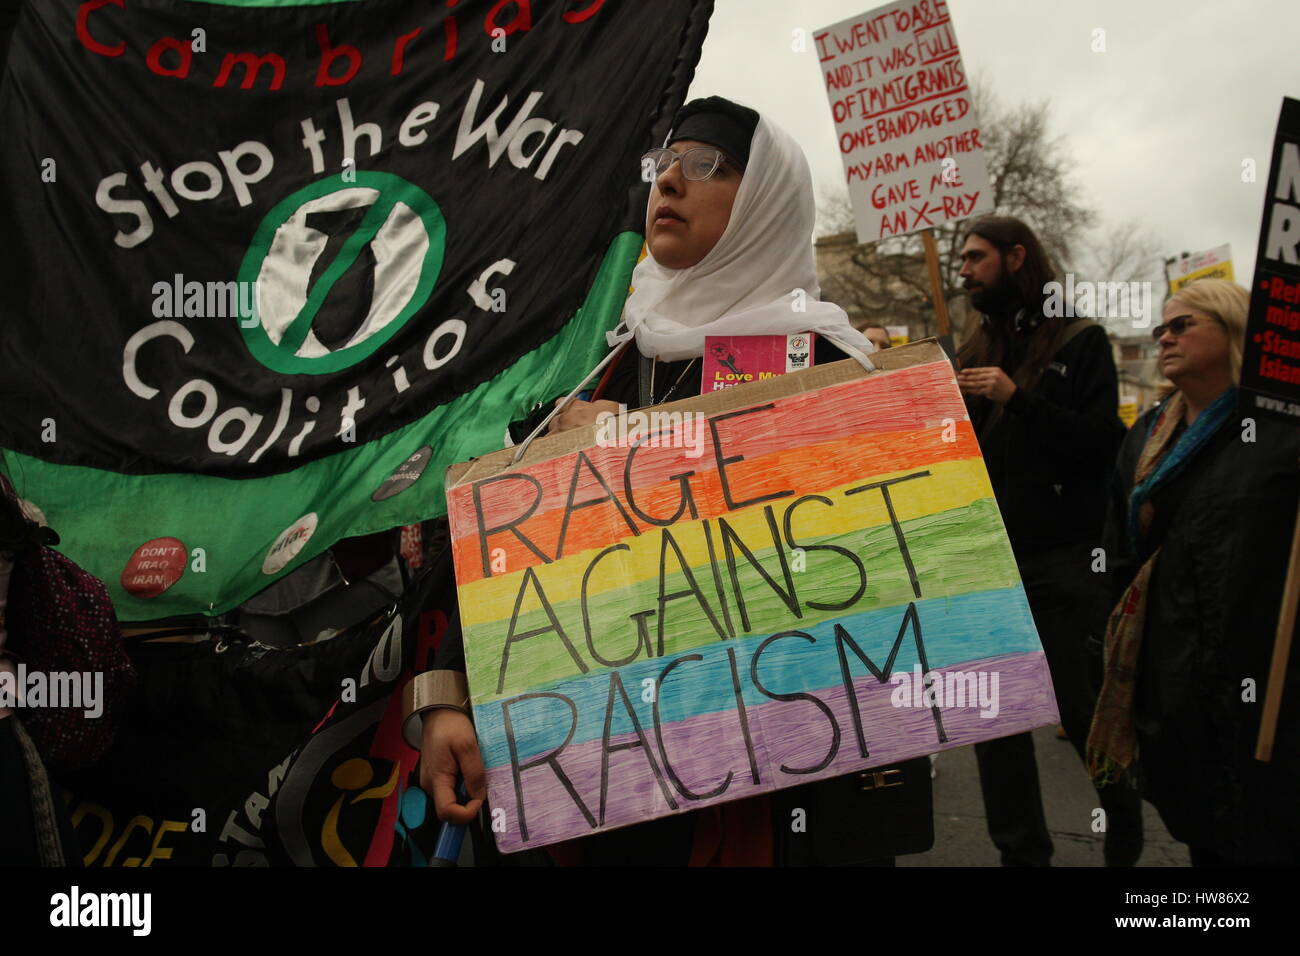 London, UK, 18th March 2017. Campaign group Stand Up to Racism holds a march through central London to mark UN anti-racism day. A woman holds a Stop the War banner and a placard saying 'Rage Against Racism'. Roland Ravenhill/ Alamy Live News Stock Photo